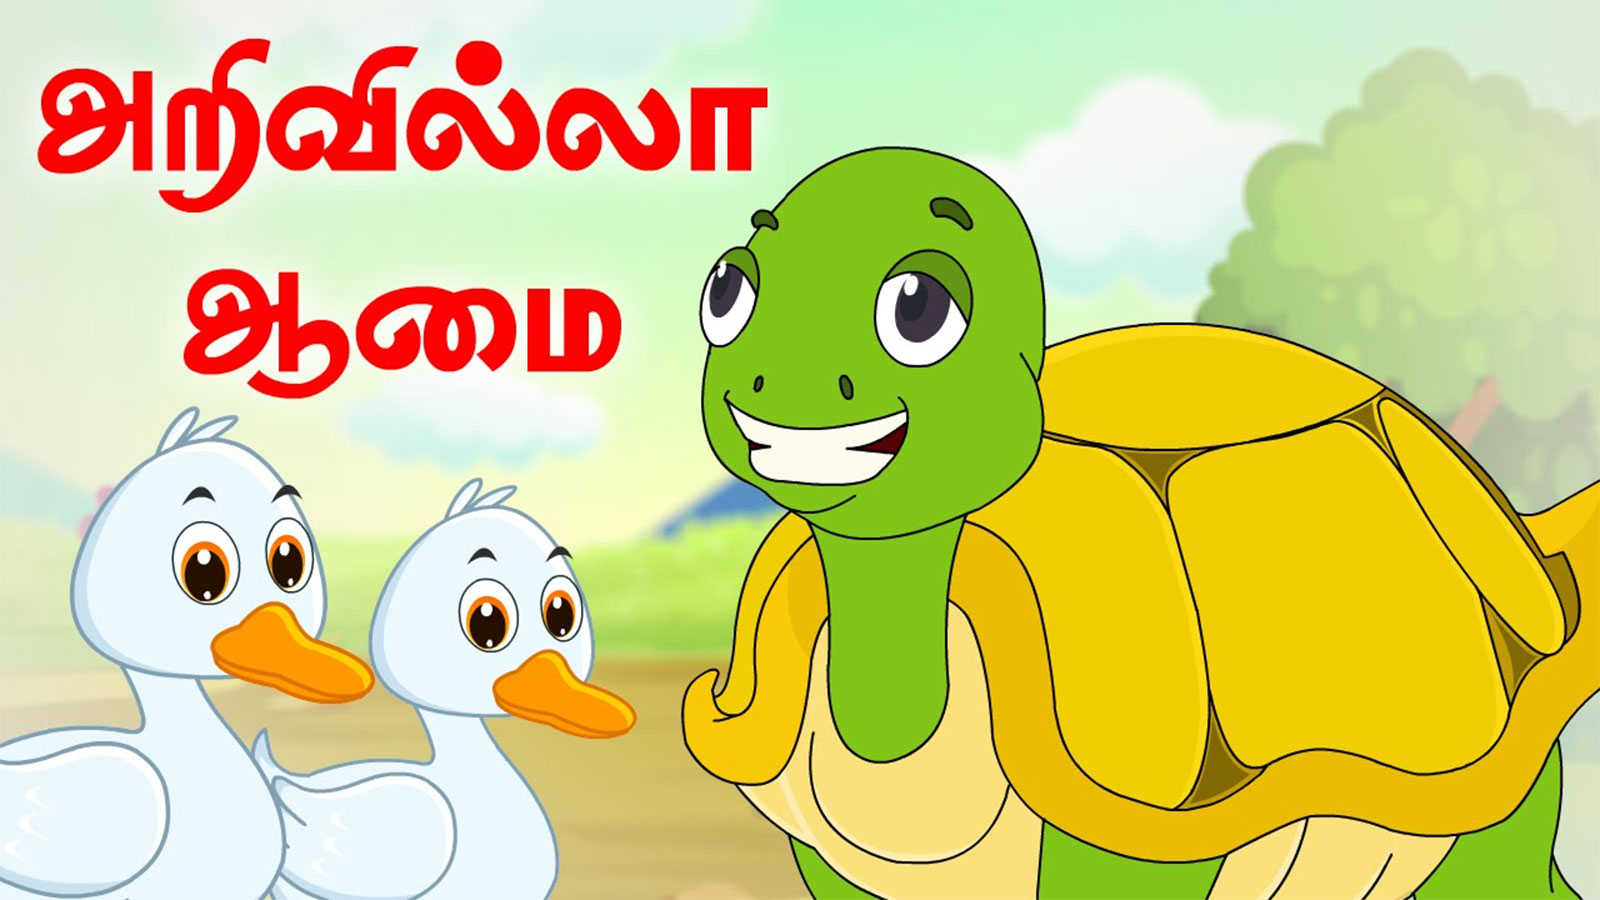 Watch Latest Kids Tamil Nursery Story 'Foolish Tortoise - அறிவில்லா ஆமை'  for Kids - Check Out Children's Nursery Stories, Baby Songs, Fairy Tales In  Tamil | Entertainment - Times of India Videos